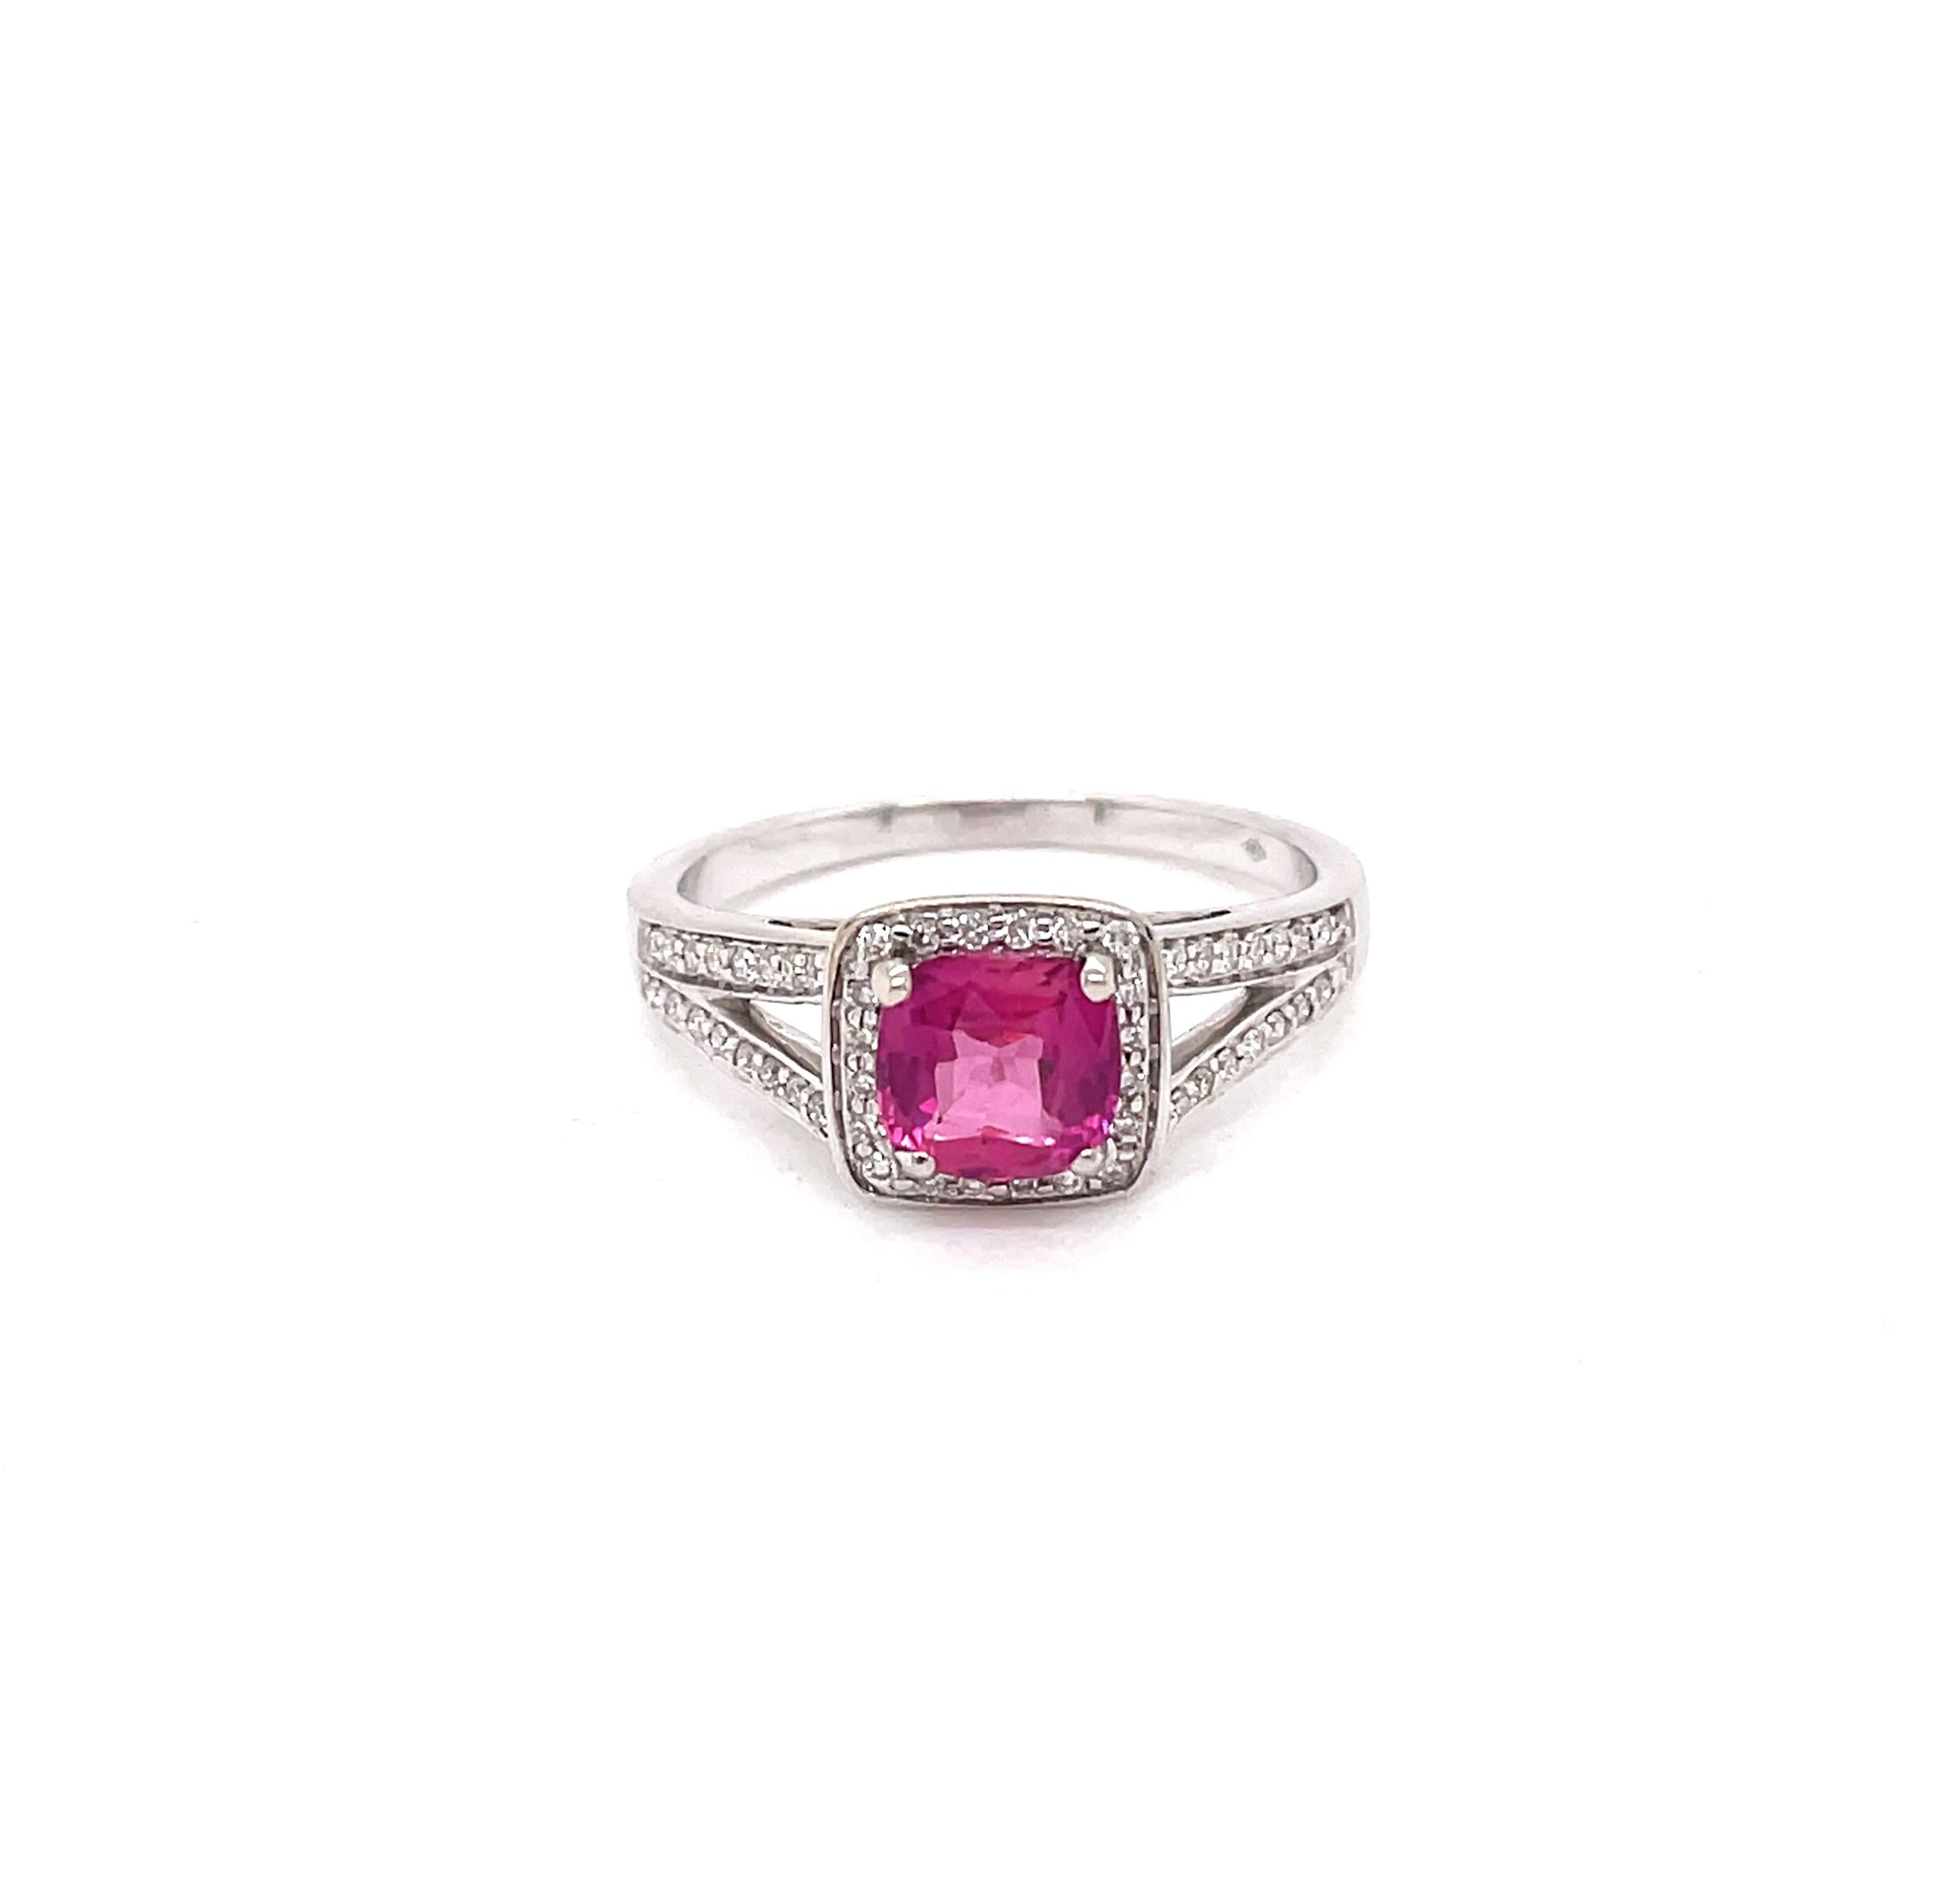 This stunning engagement ring features a vibrant cushion shaped pink sapphire weighing 1.22ct mounted in a four claw, open back setting. The gorgeous gemstone is surrounded by a halo of round brilliant cut diamonds mounted atop a diamond set split